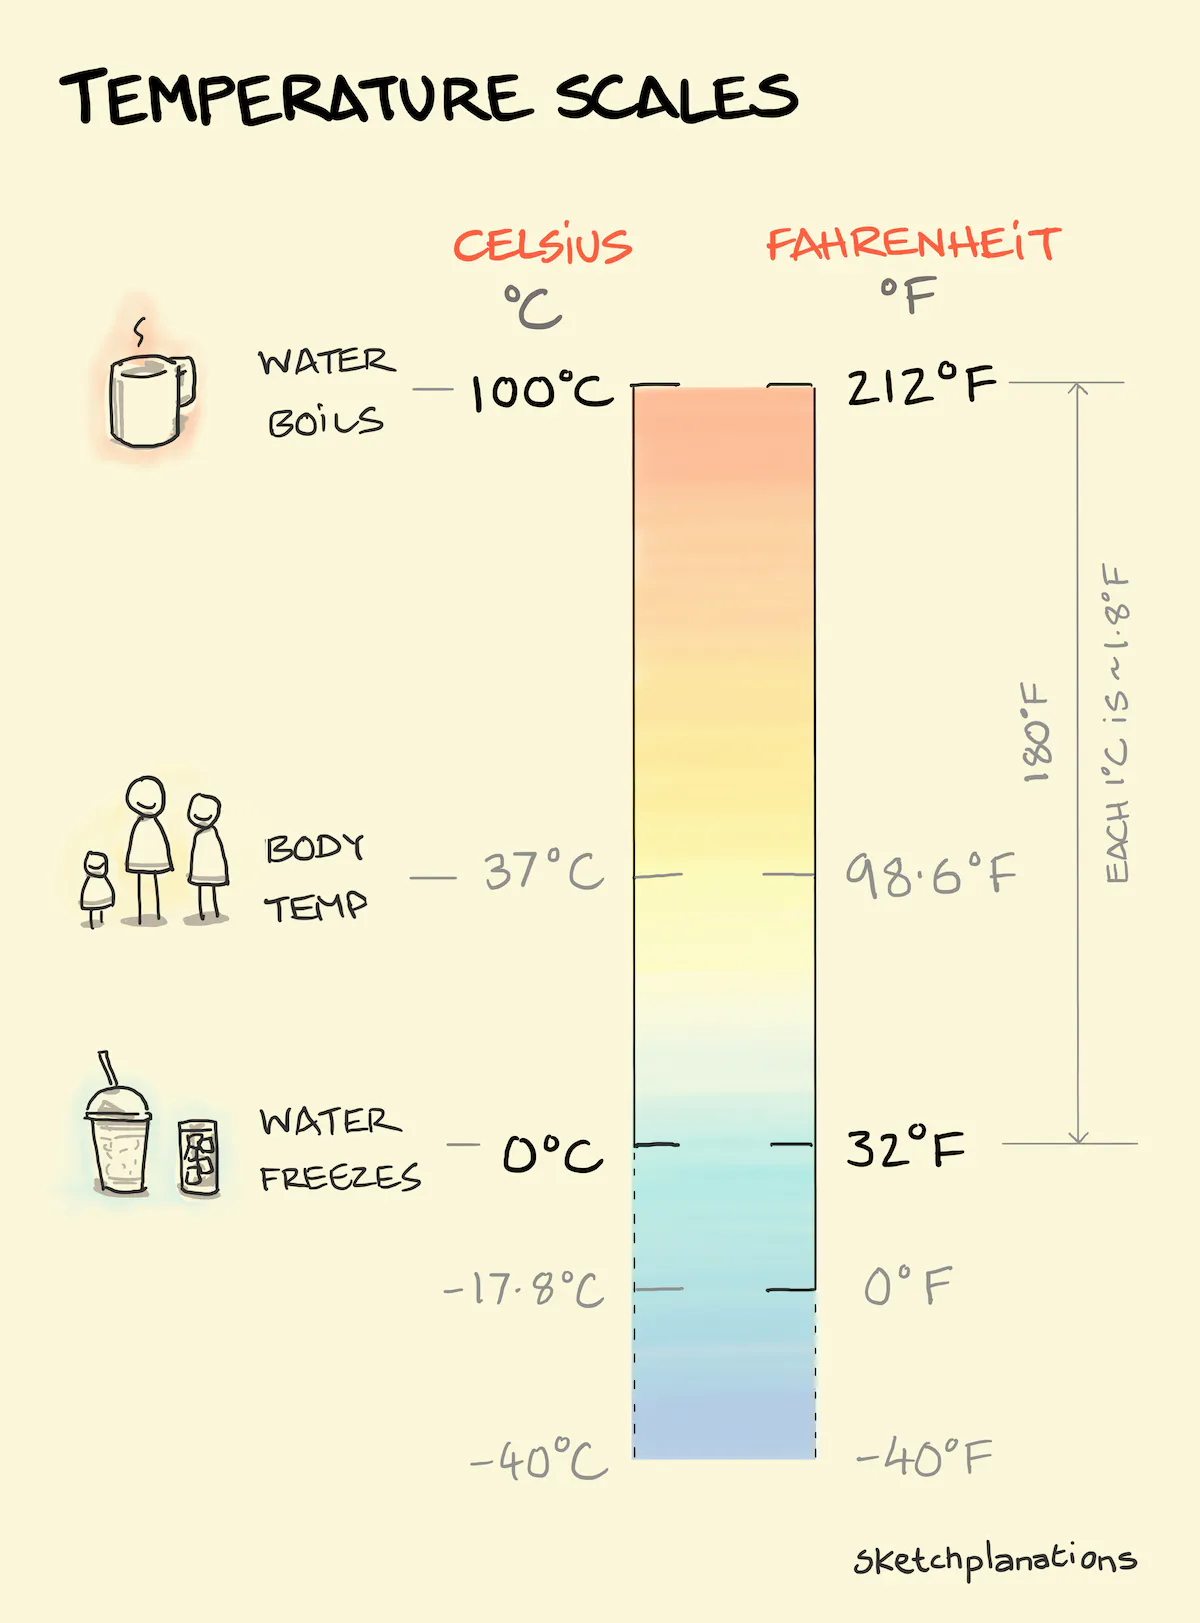 Who Invented the Fahrenheit and Celsius Temperature Scales and